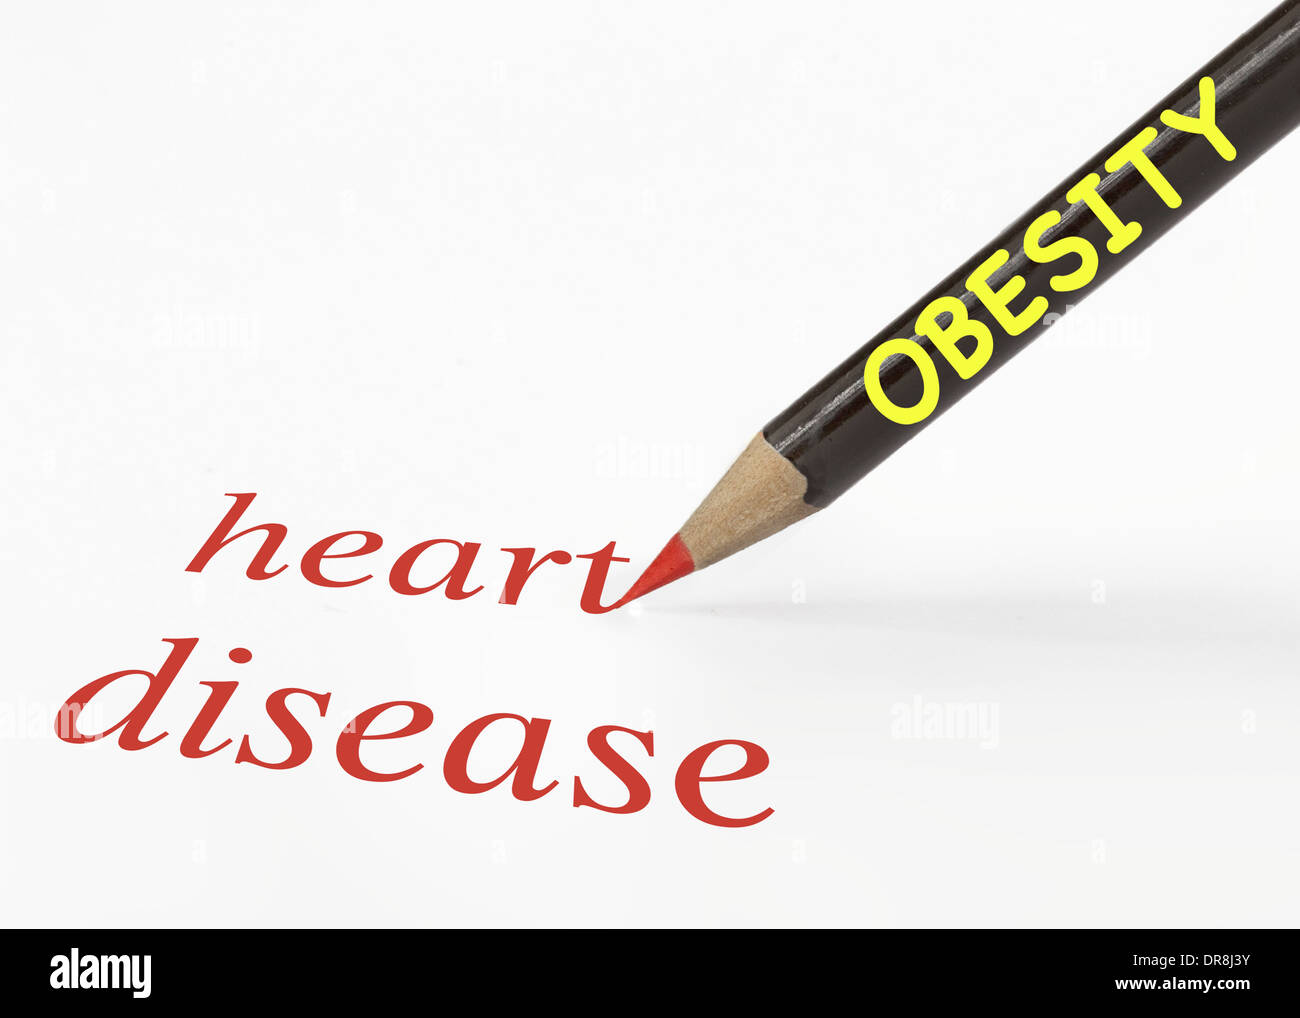 Idea of obesity leads to heart disease using a pencil analogy Stock Photo